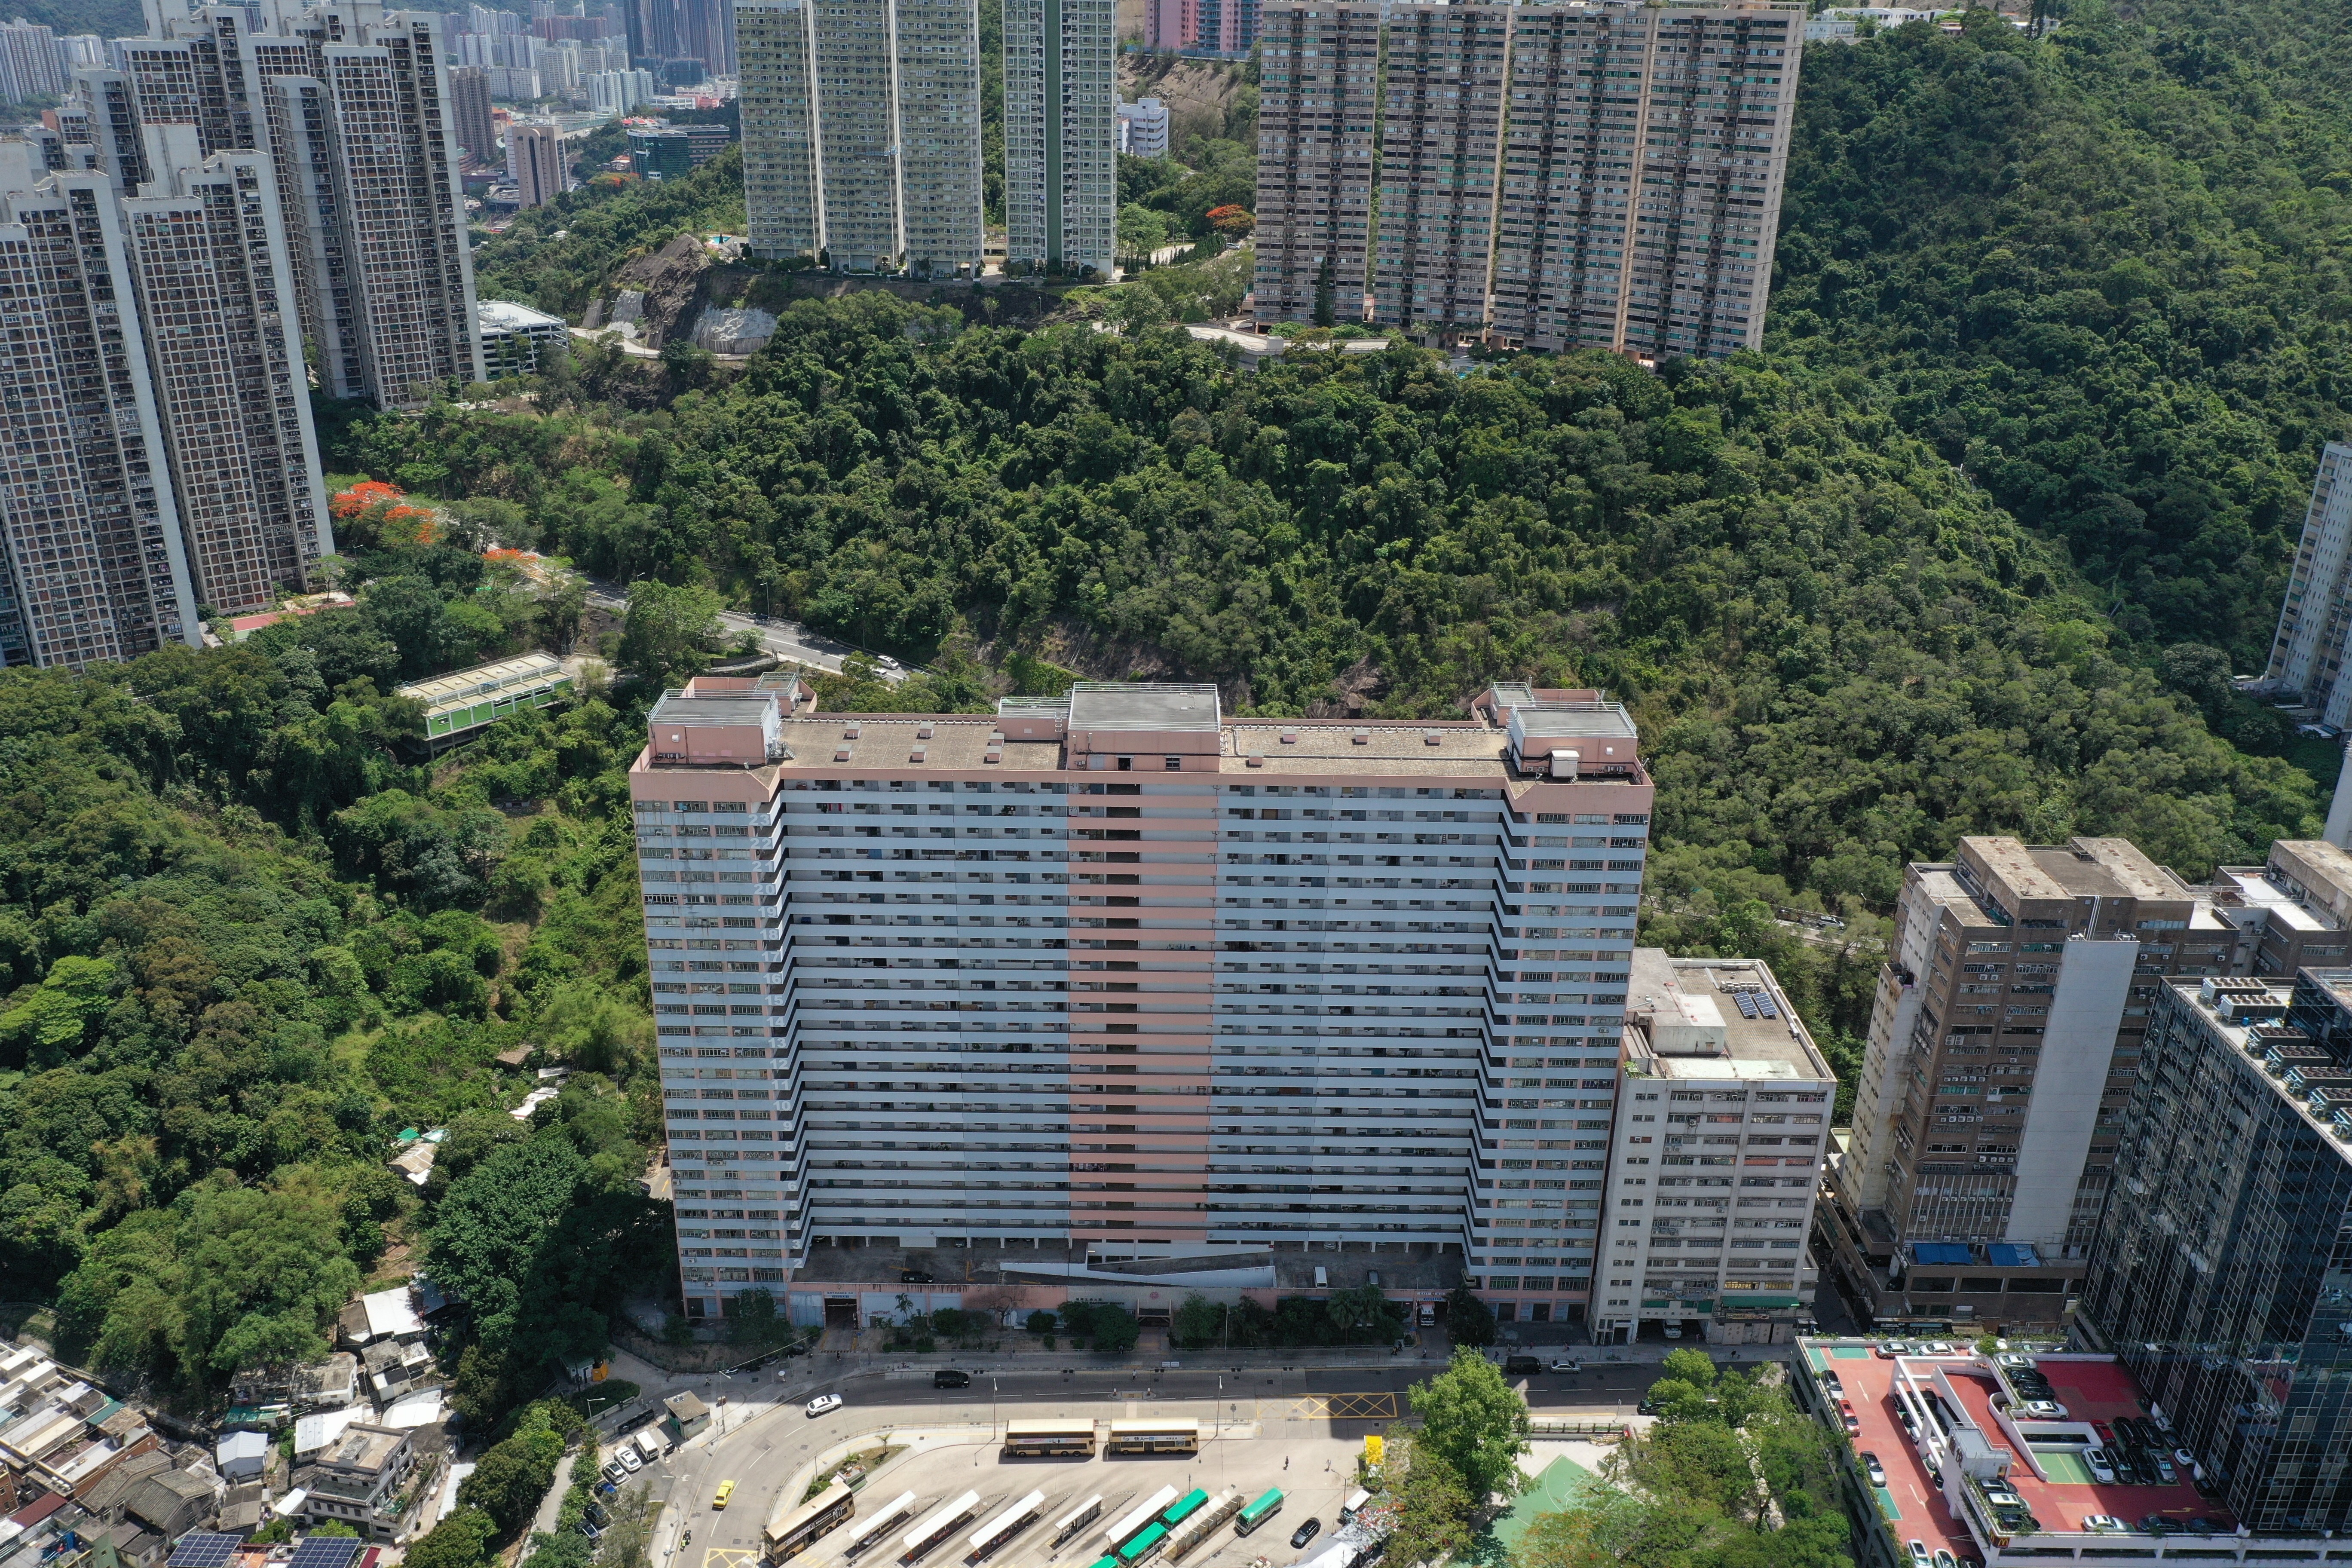 The Sui Fai Factory Estate in Fo Tan is one of three sites to be converted into public housing. Photo: May Tse